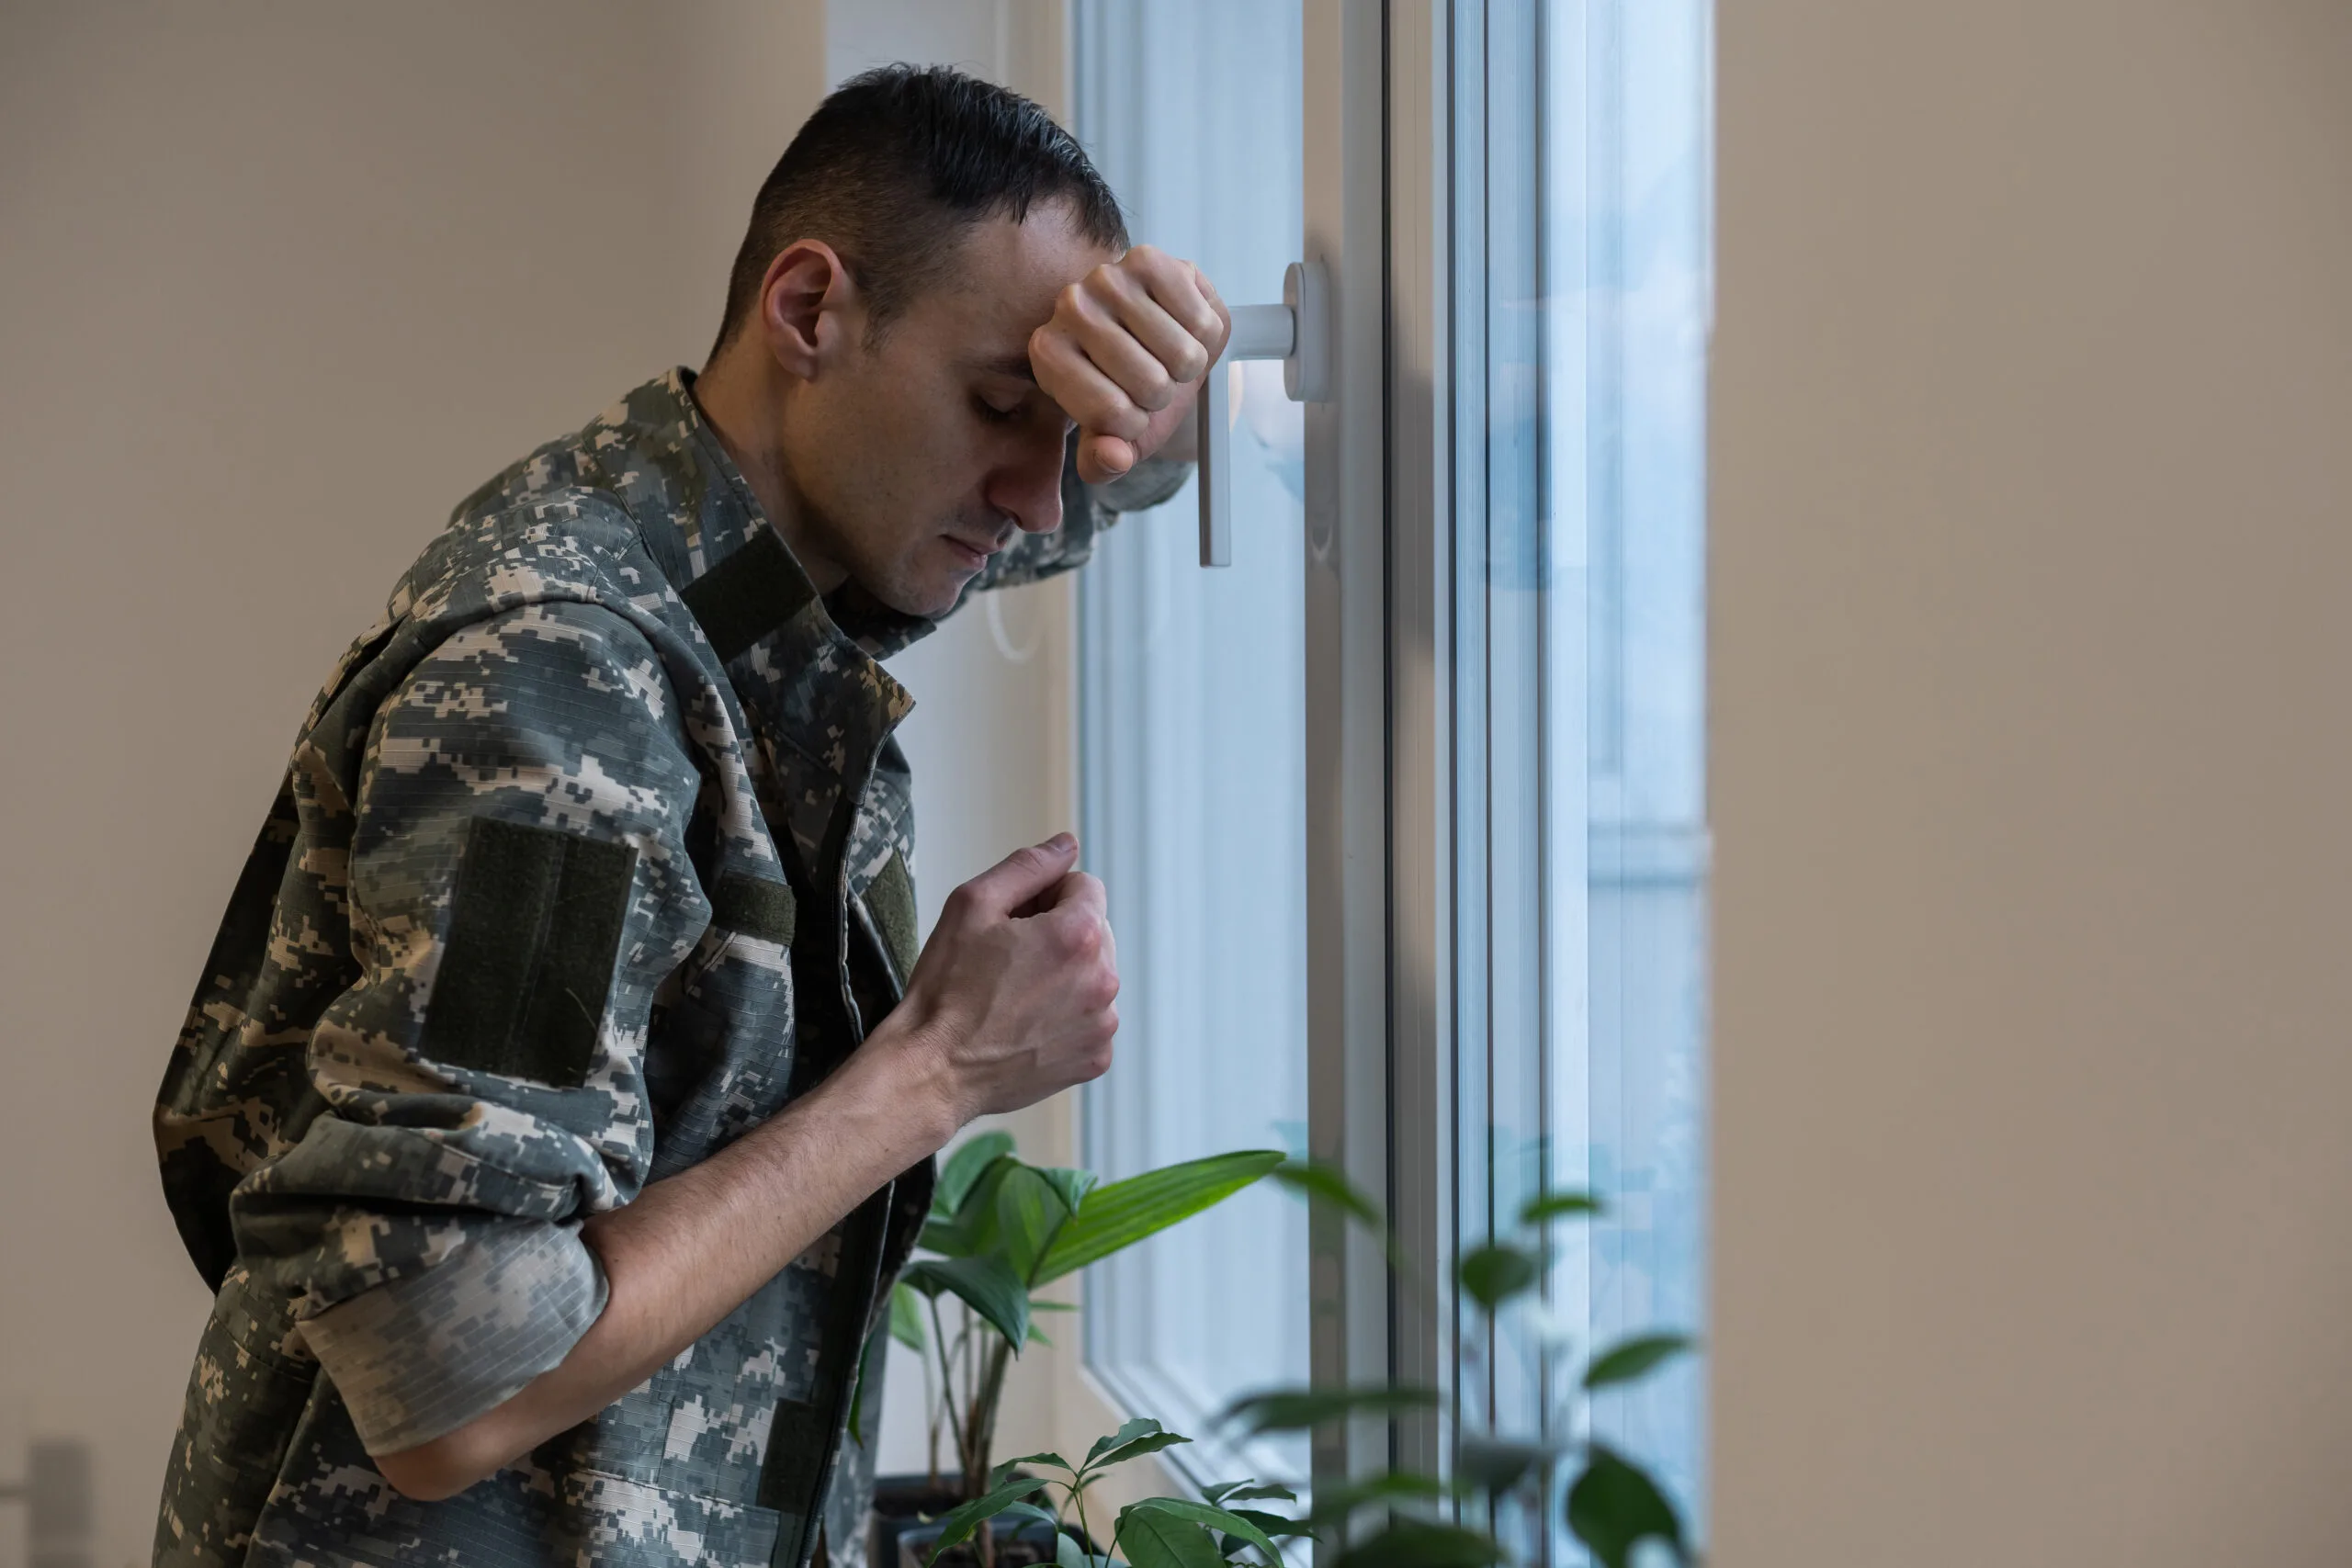 Depressed and sad soldier in green uniform with trauma after war standing near the window.